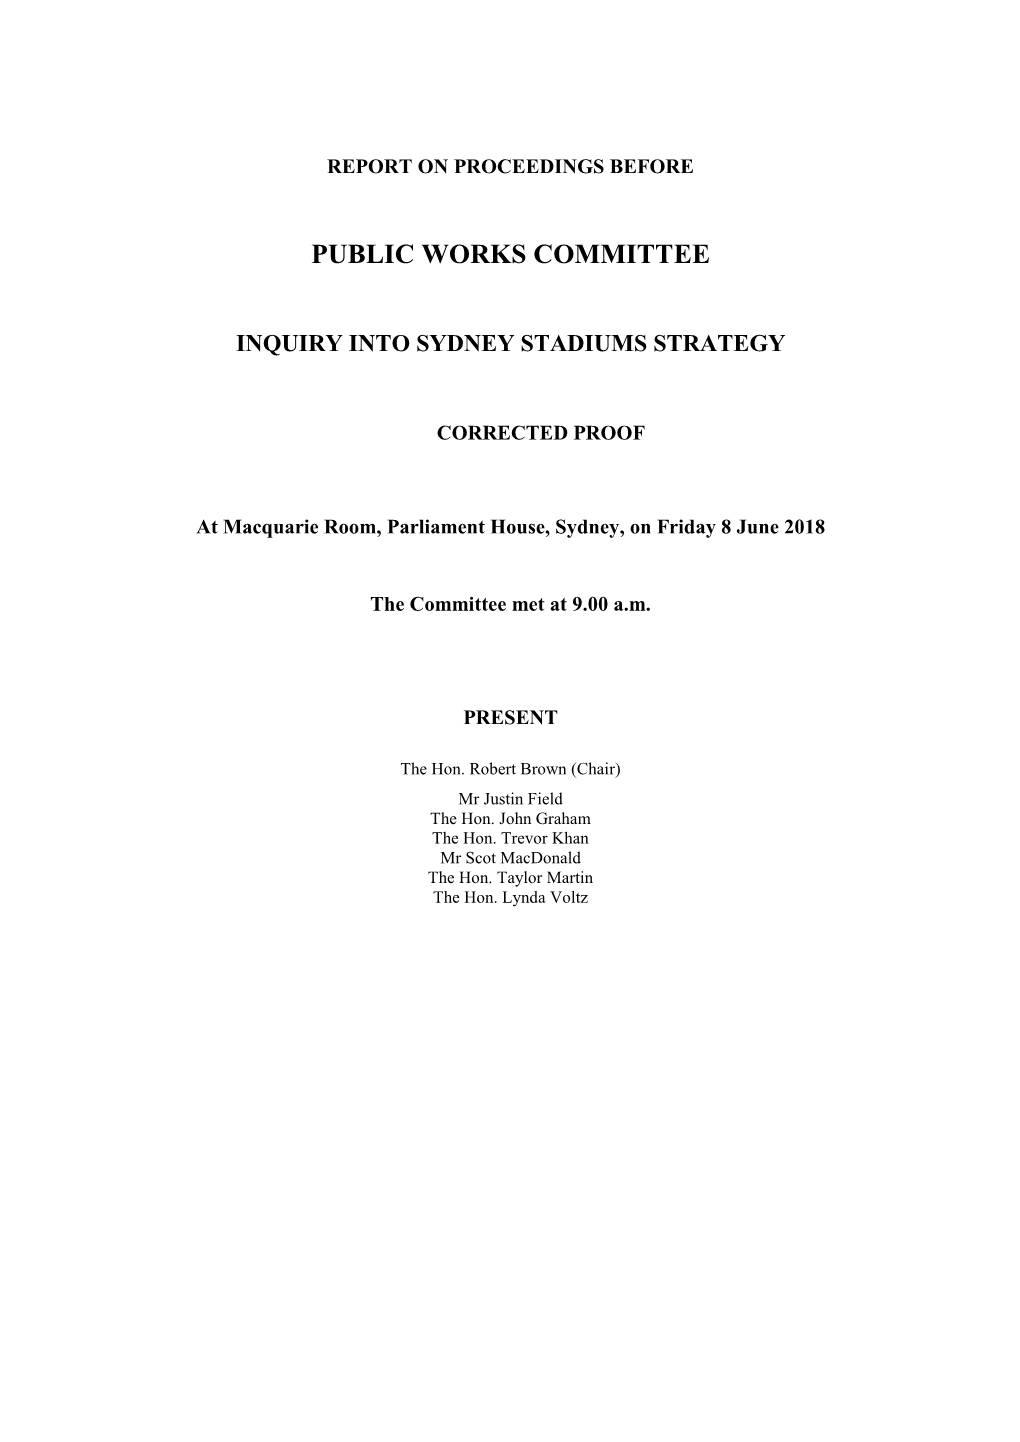 Public Works Committee